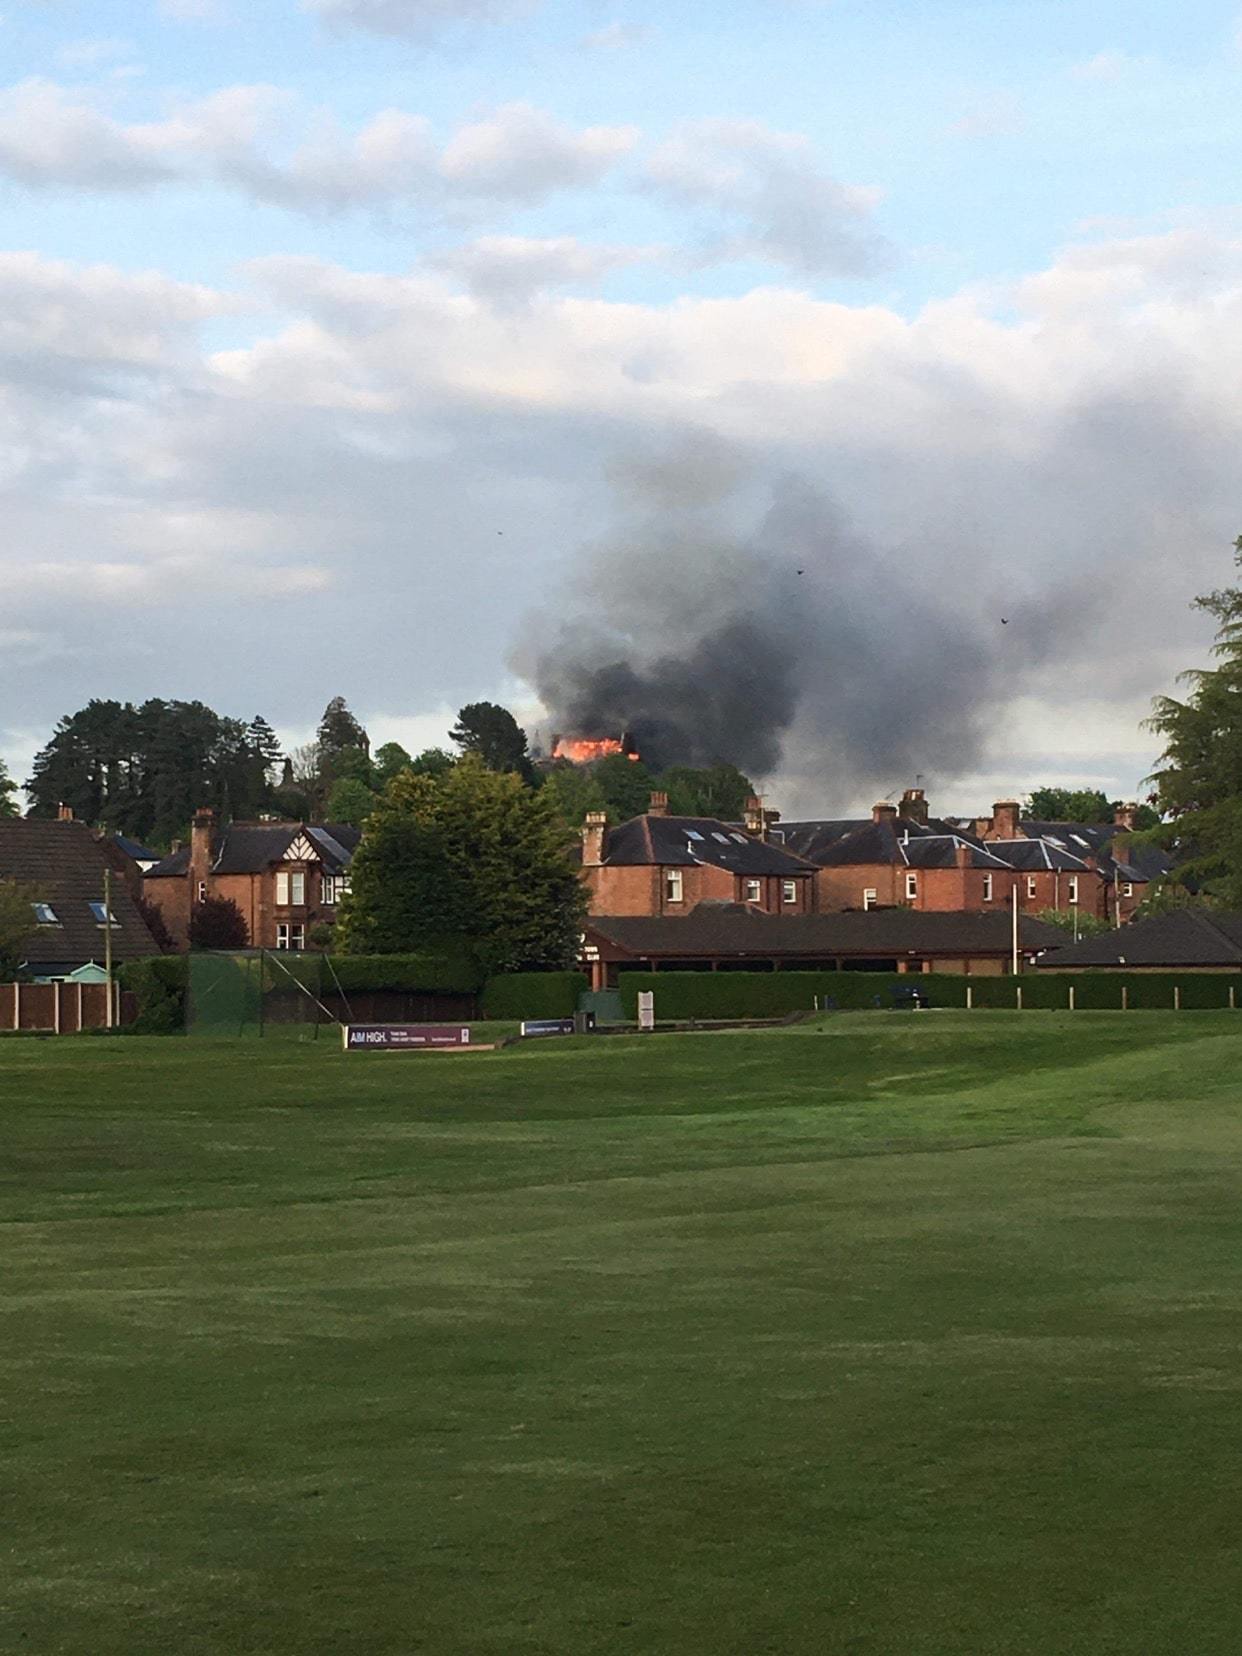 The fire at the former Benedictine convent in Dumfries started at around 7.25pm on Tuesday.